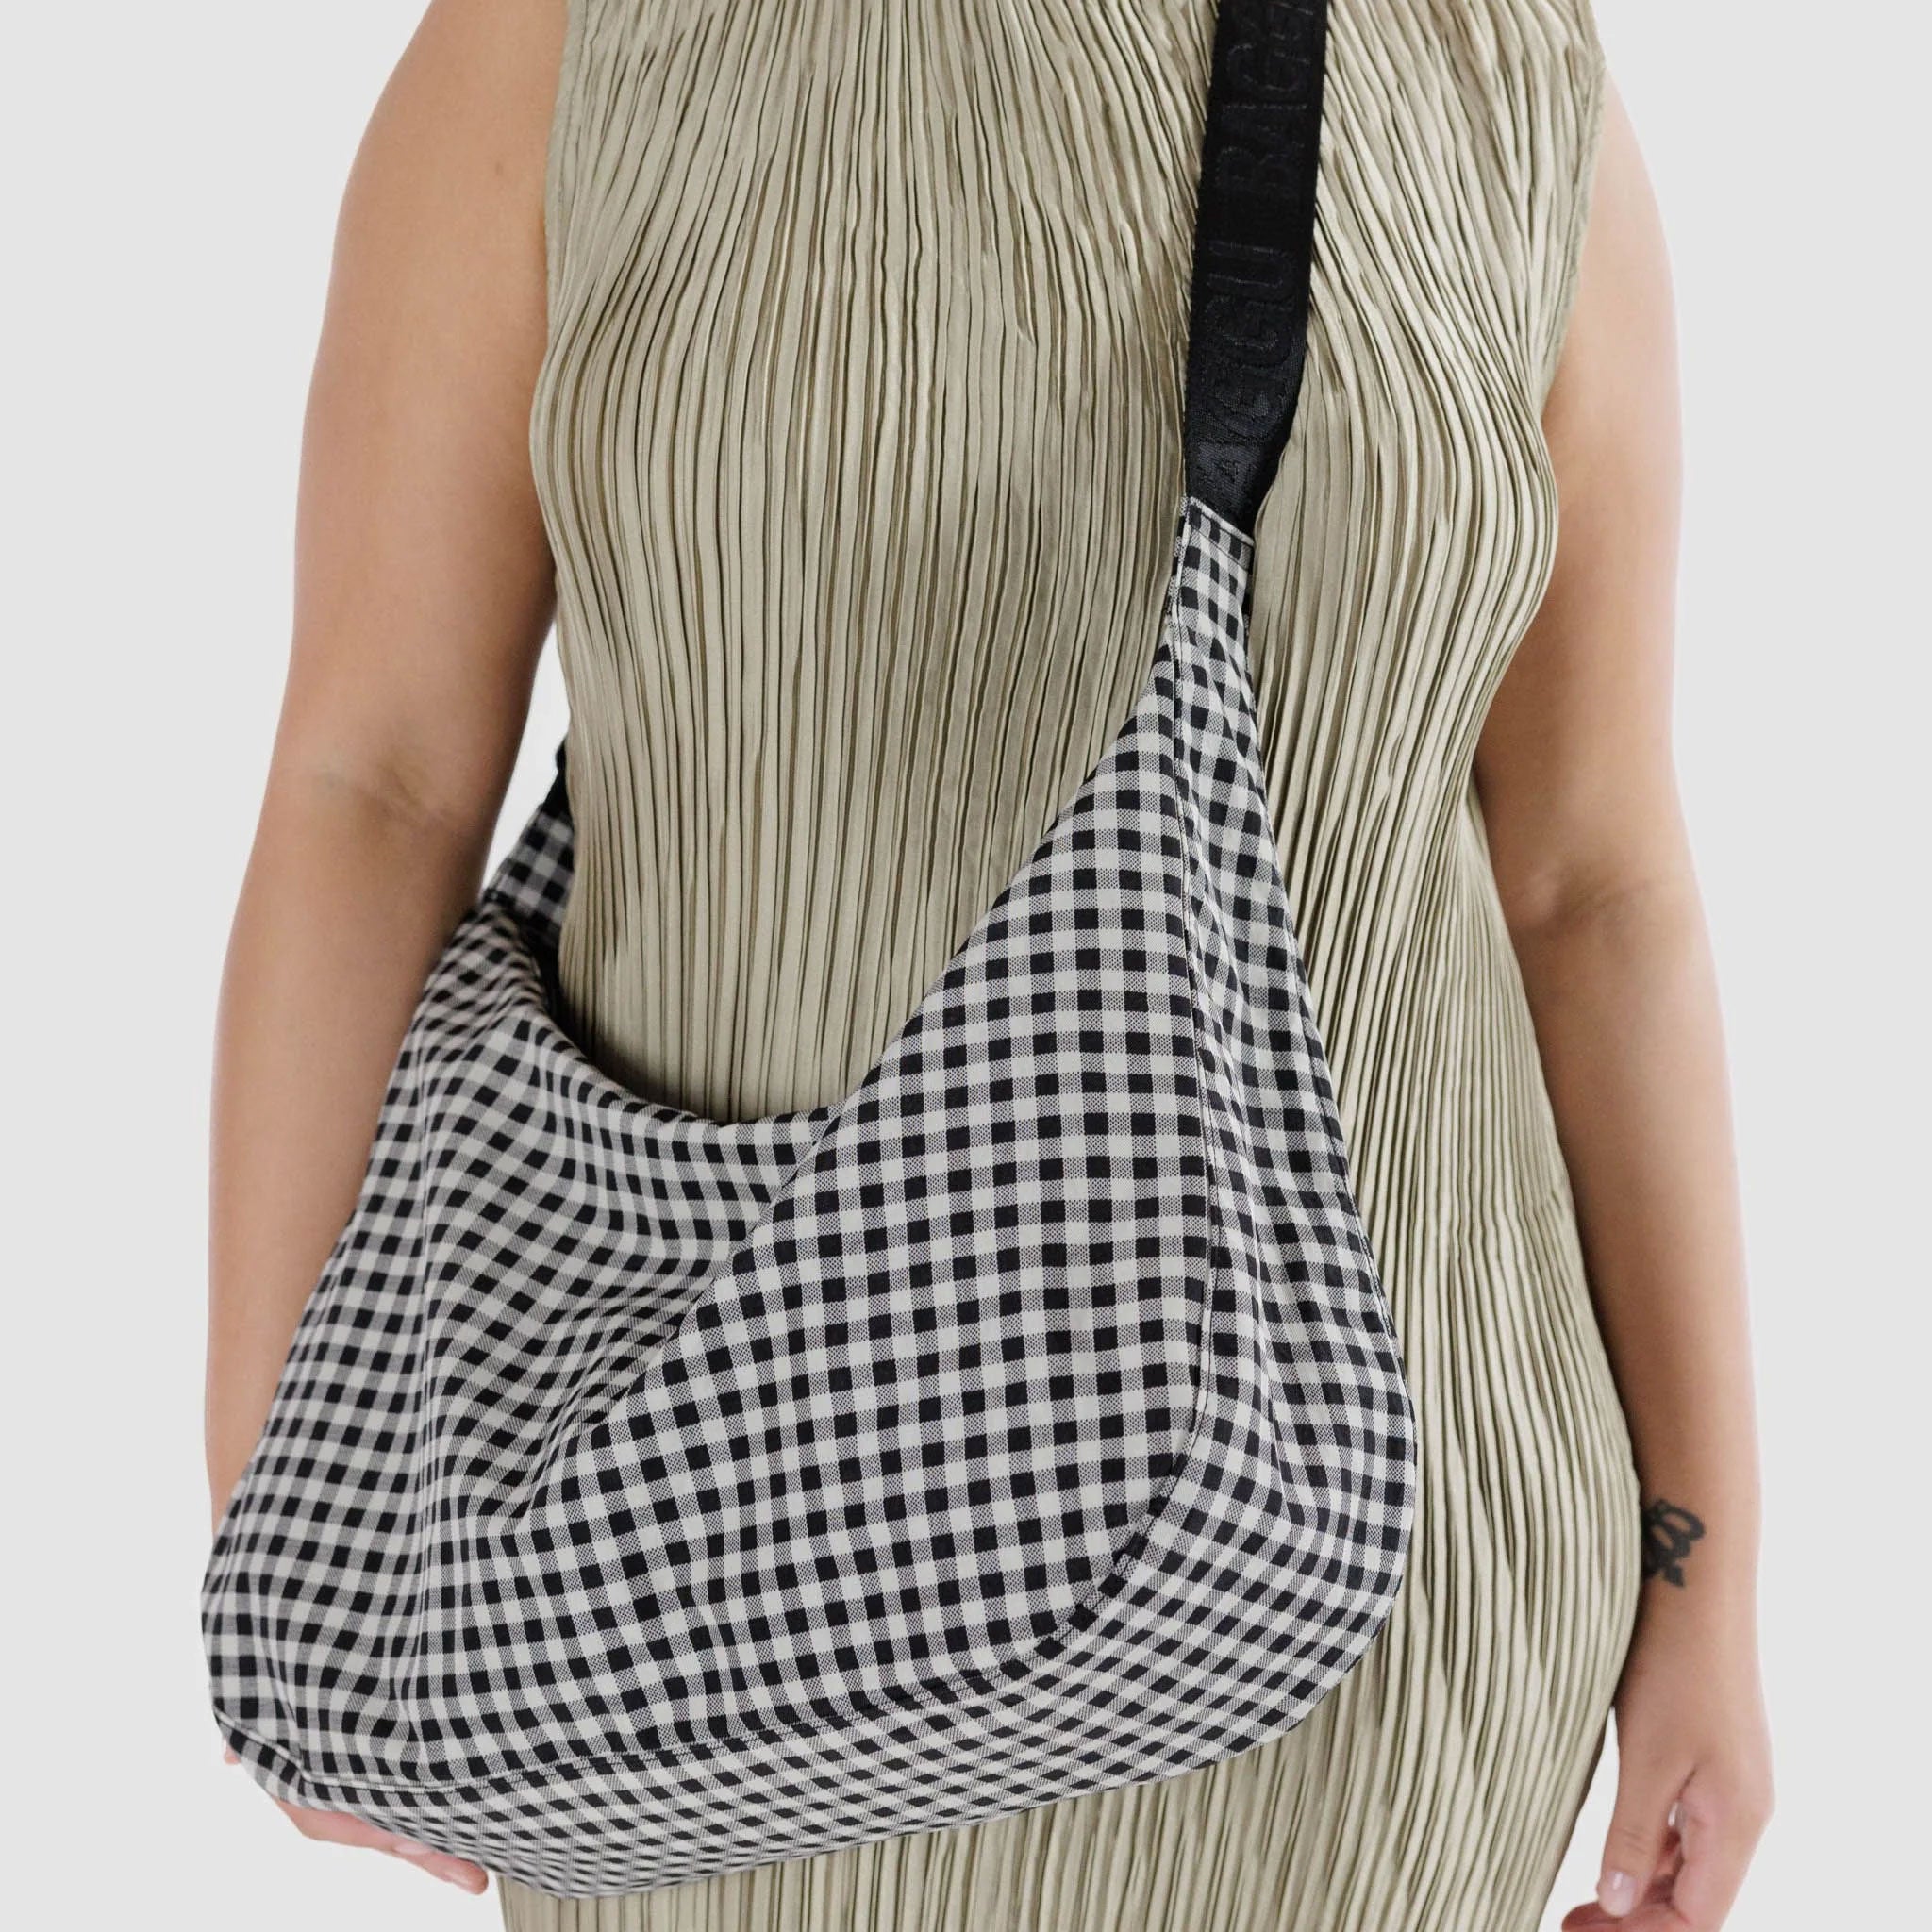 large crescent shaped bag in black and white gingham print